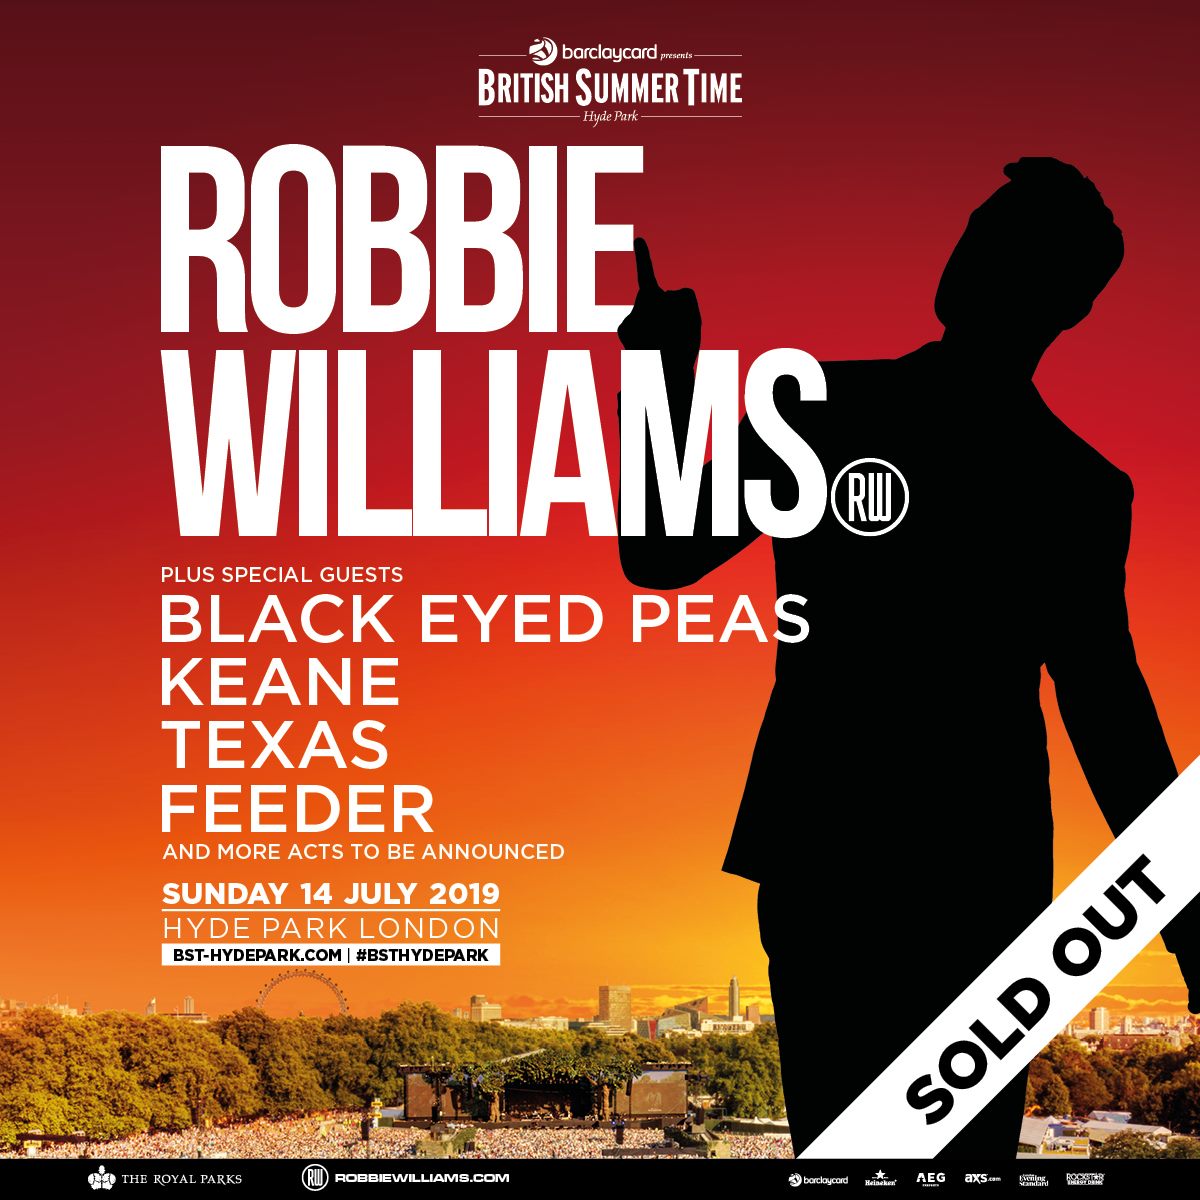 Tickets for @BSTHydePark have now SOLD OUT.
See you on Sunday 14 July x https://t.co/tupviOQXgV